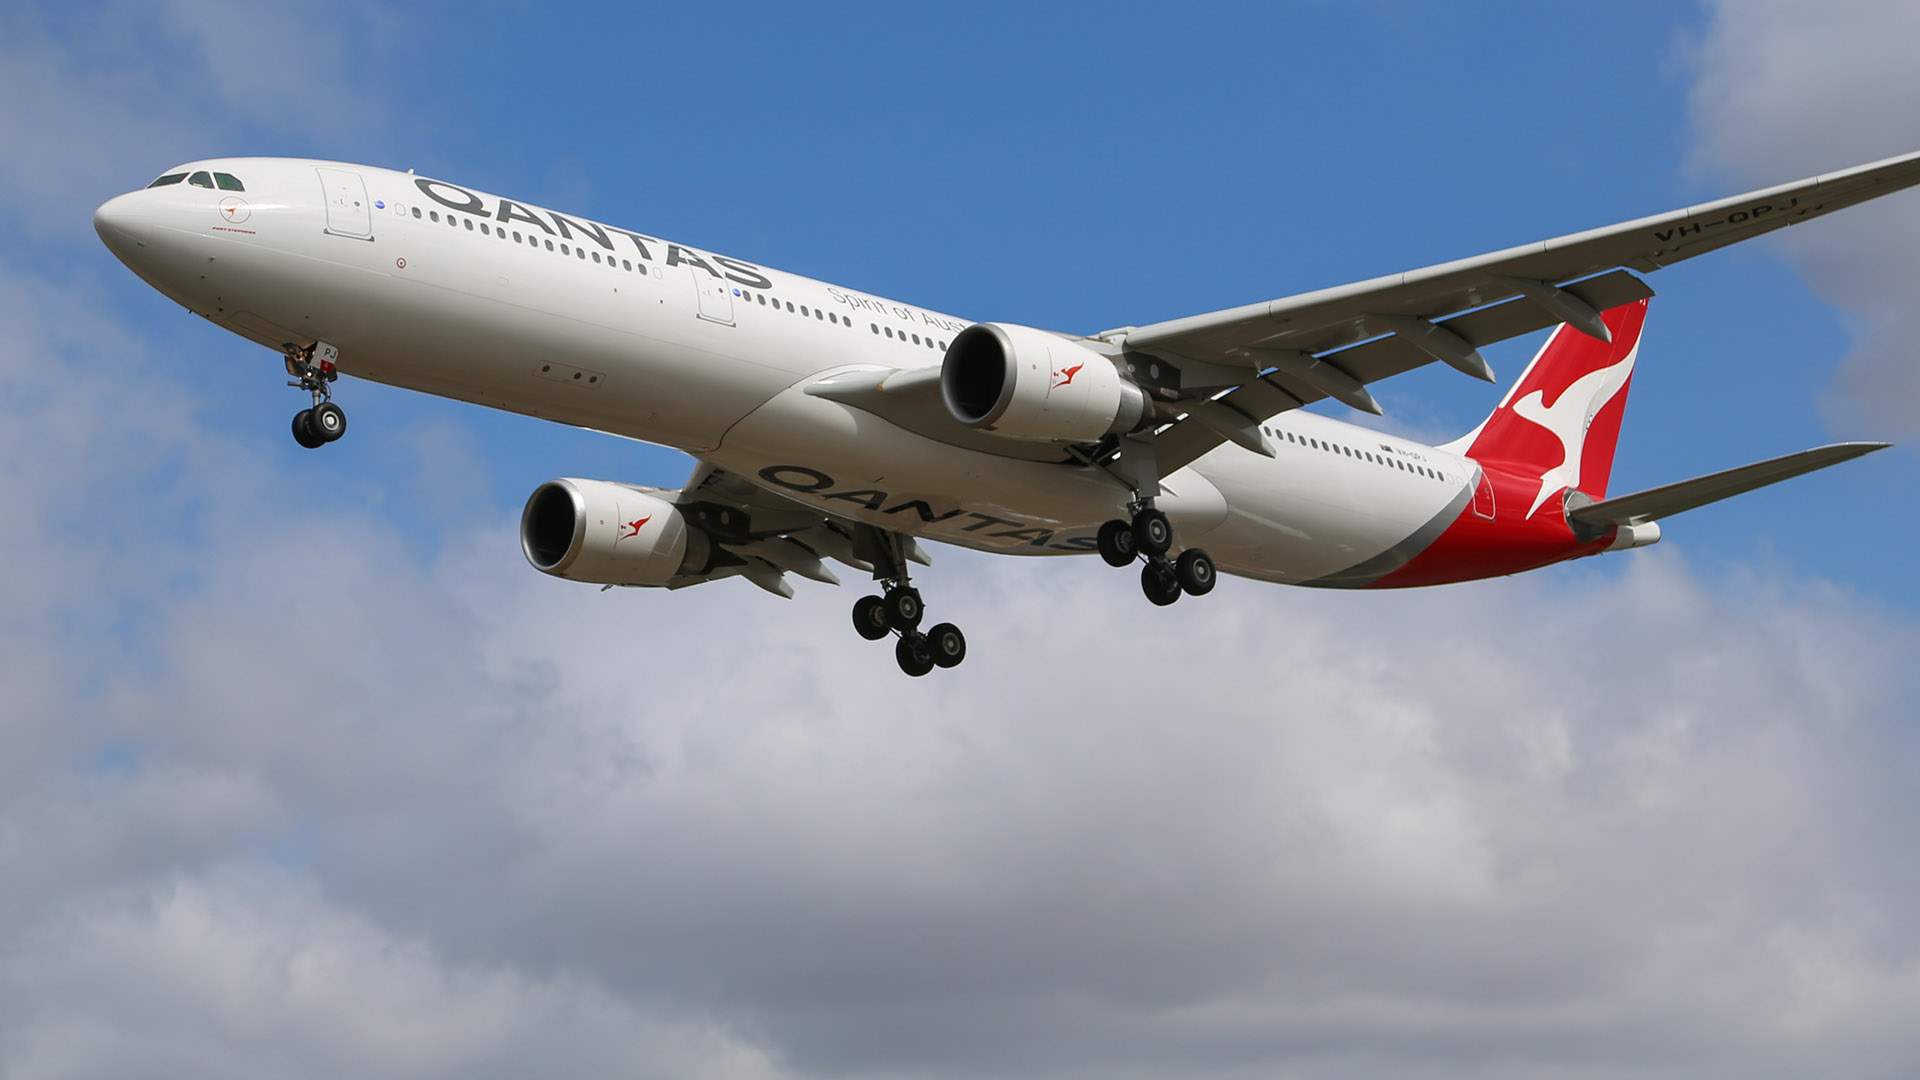 Melbourne Airport Terminal 1 and a Qantas Flight From Perth Have Been Listed As Exposure Sites